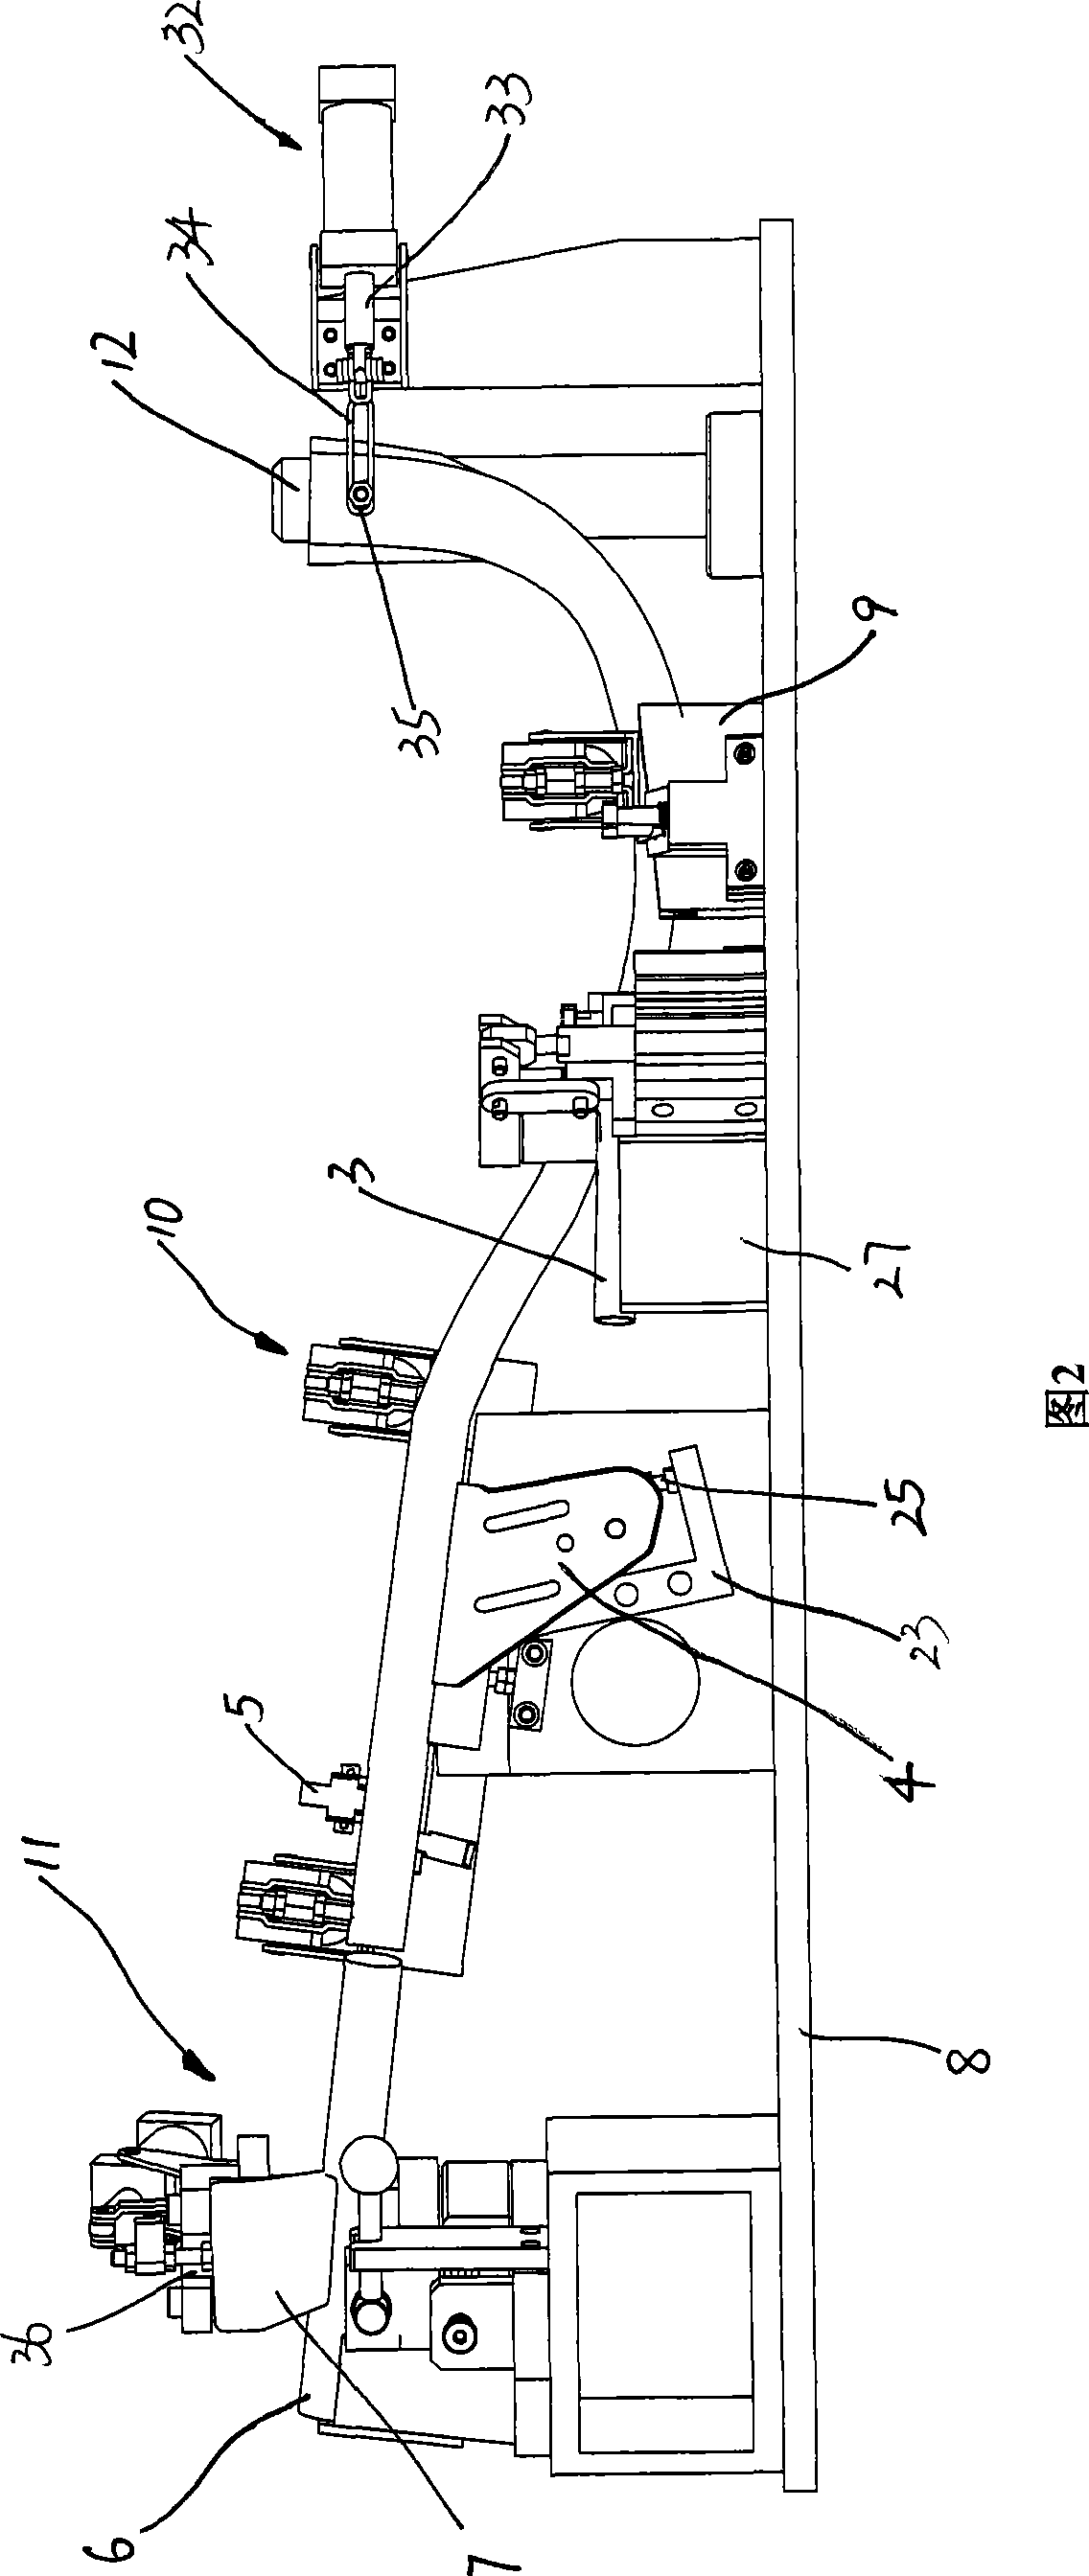 Welding clamp of winding pipe assembly